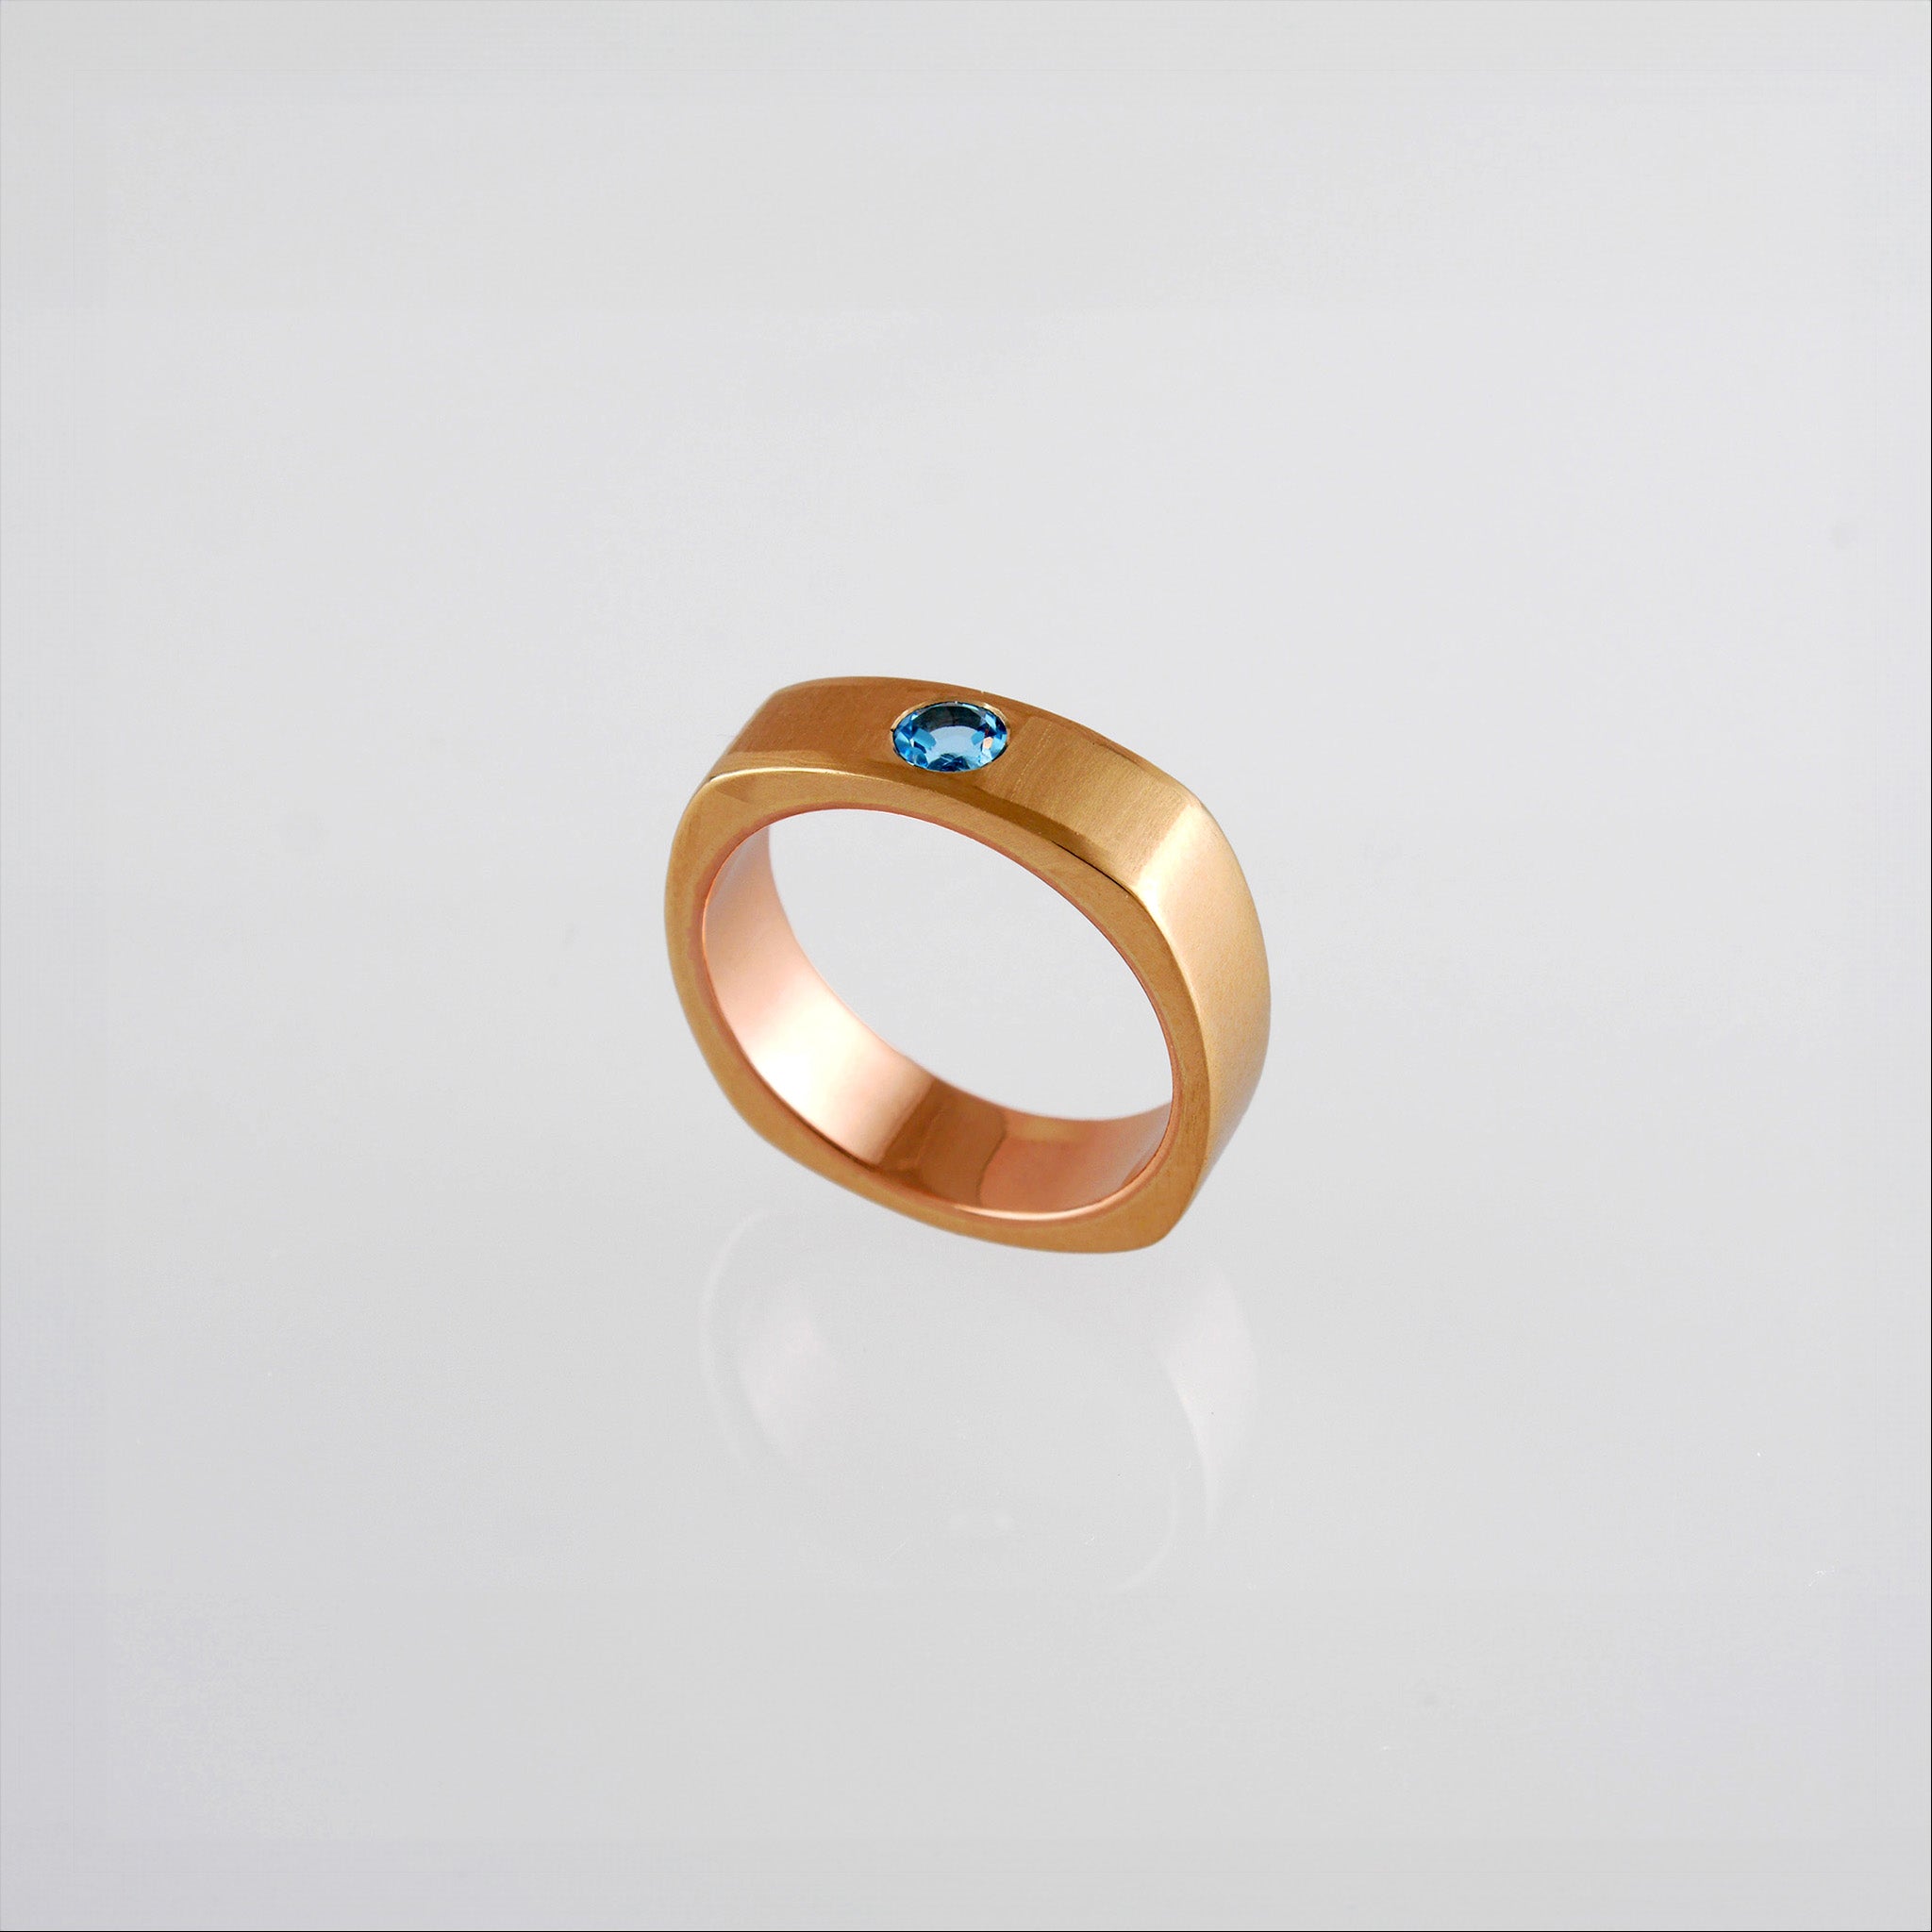 Top view of a Square Ring with rounded edges, symbolizing 'rounding the square,' crafted from 18k Rose Gold and adorned with Blue Topaz. A metaphor for overcoming challenges with grace and elegance.